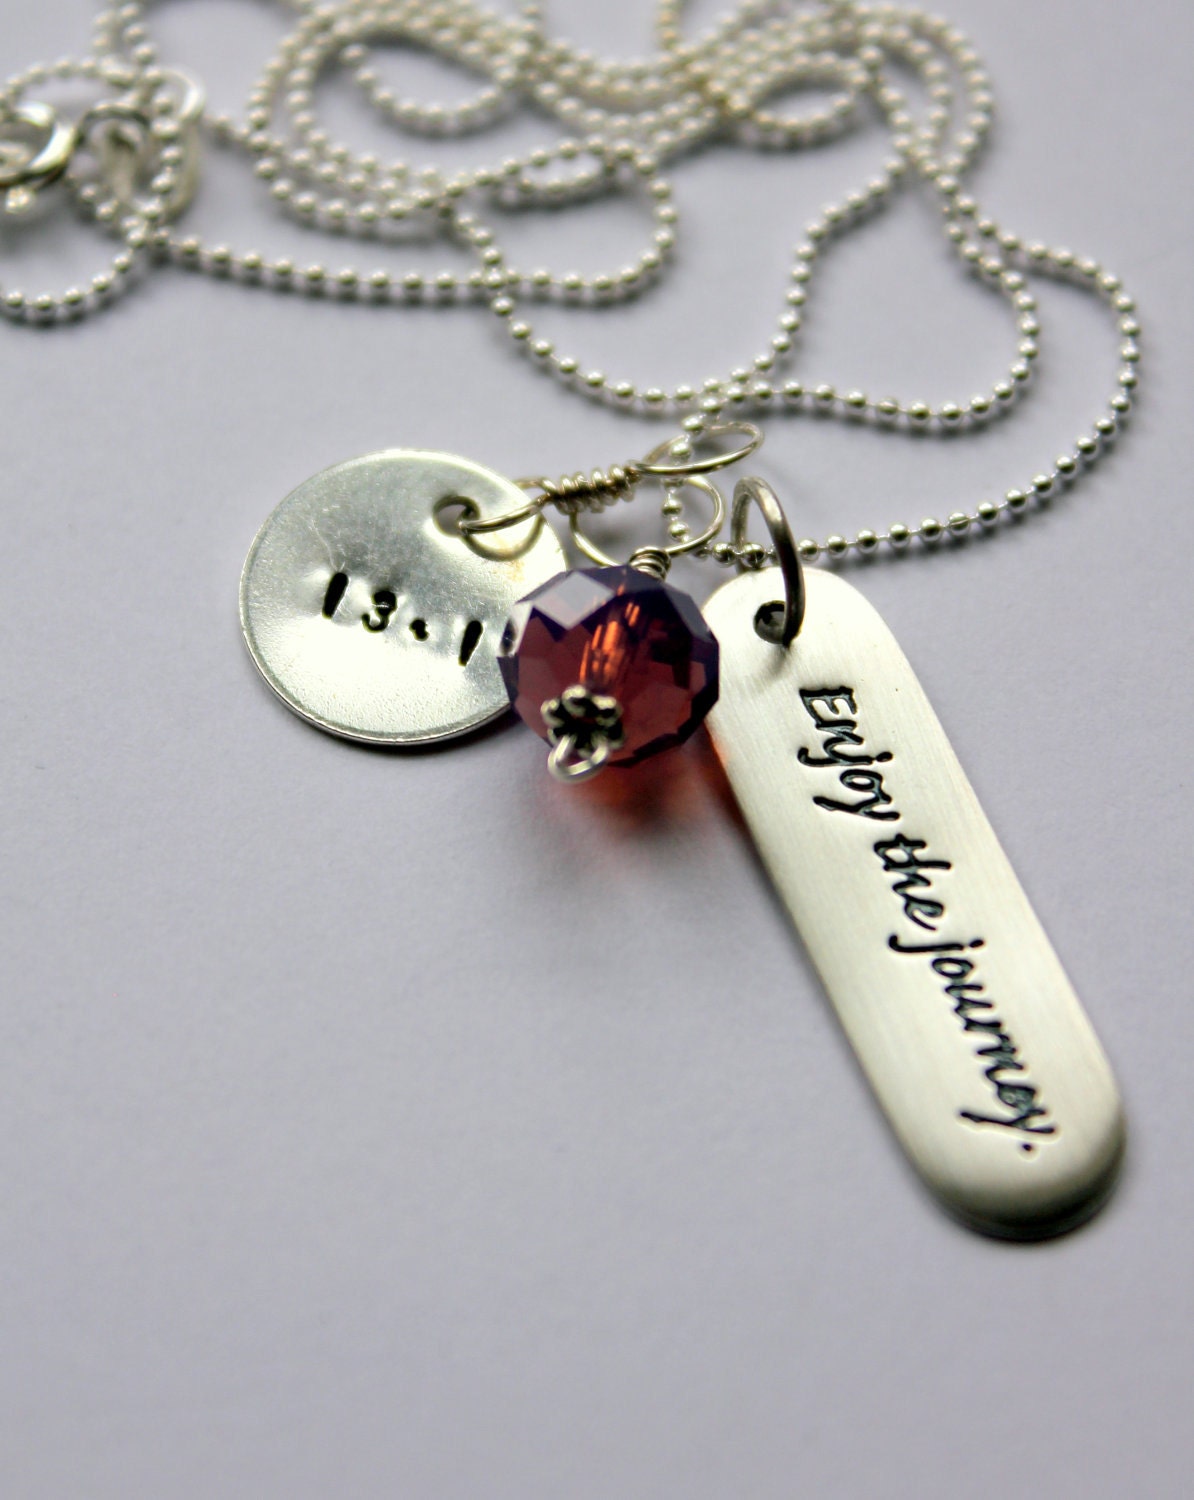 Runners Necklace Half Marathon Personalized Quote Running